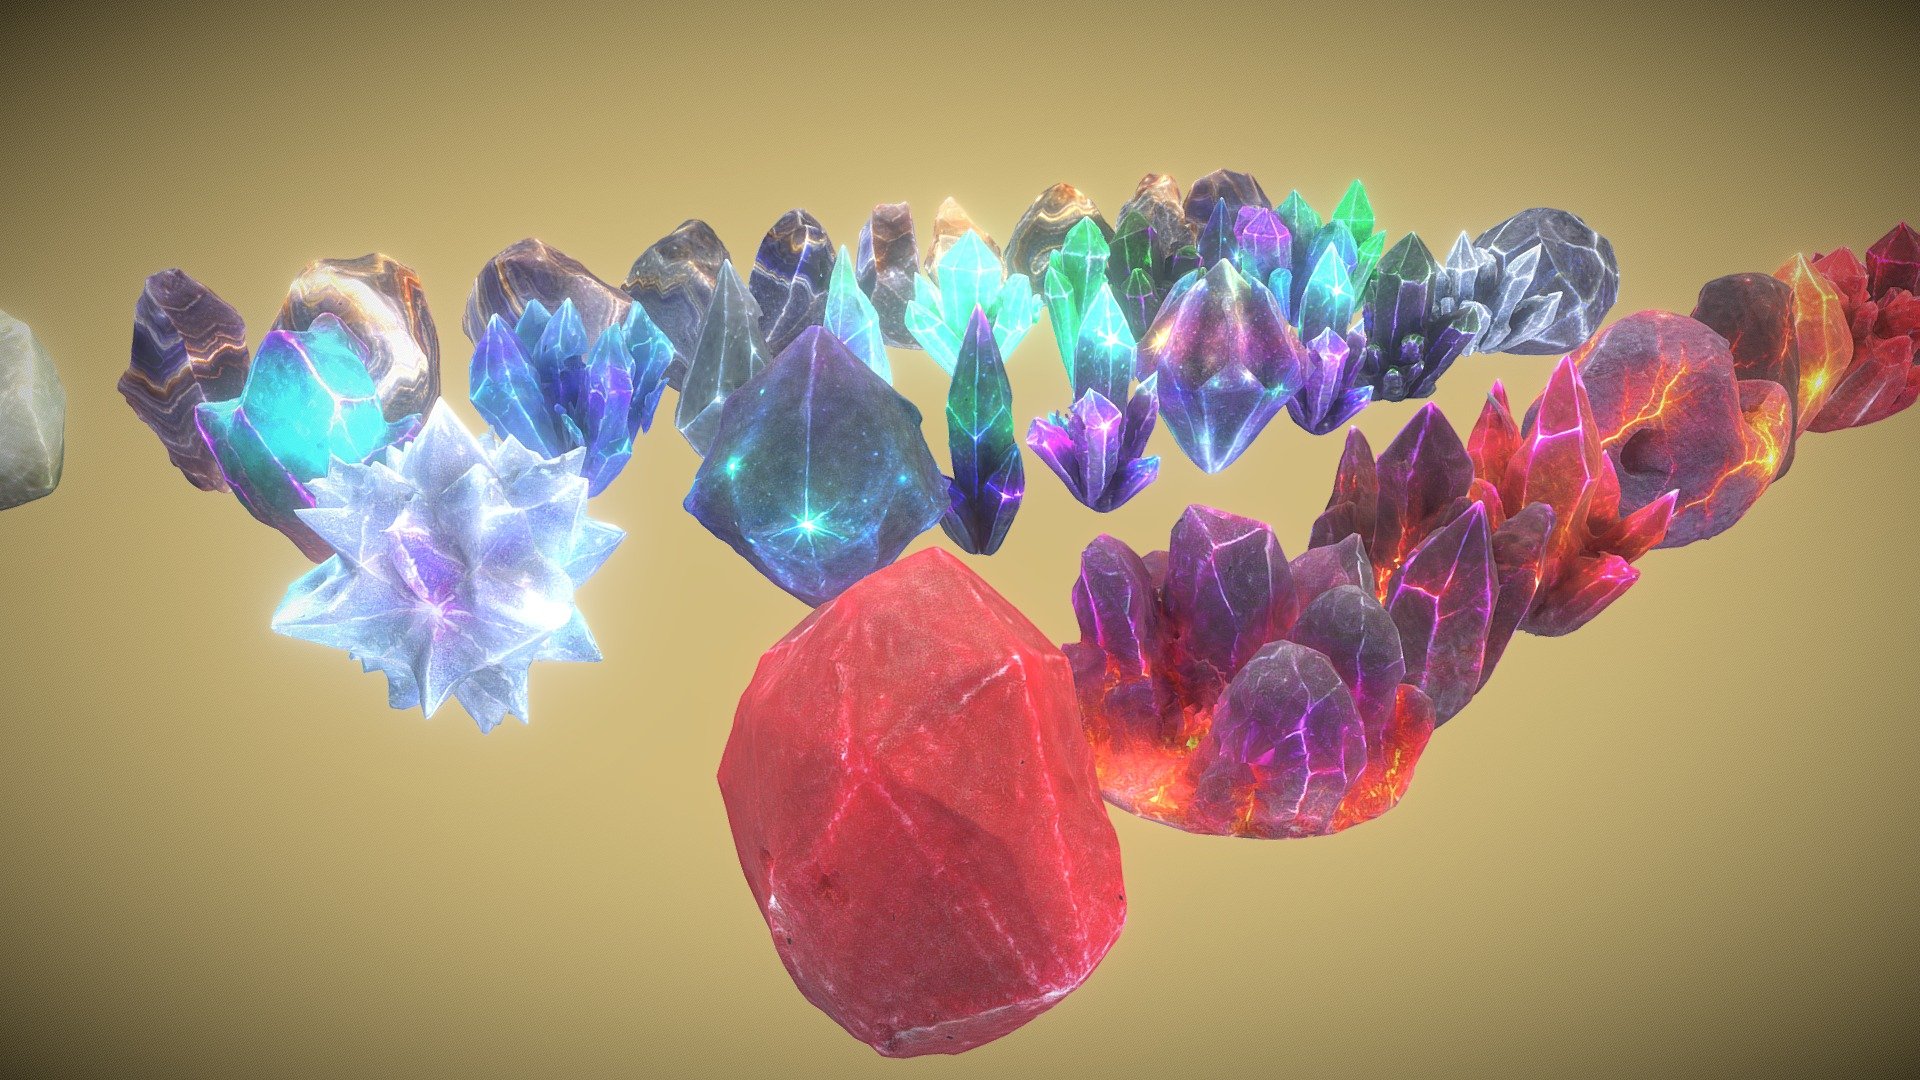 crystals collection
game assets
crystal forms
crystals models - Crystals Collection - Buy Royalty Free 3D model by SAXN 3d model